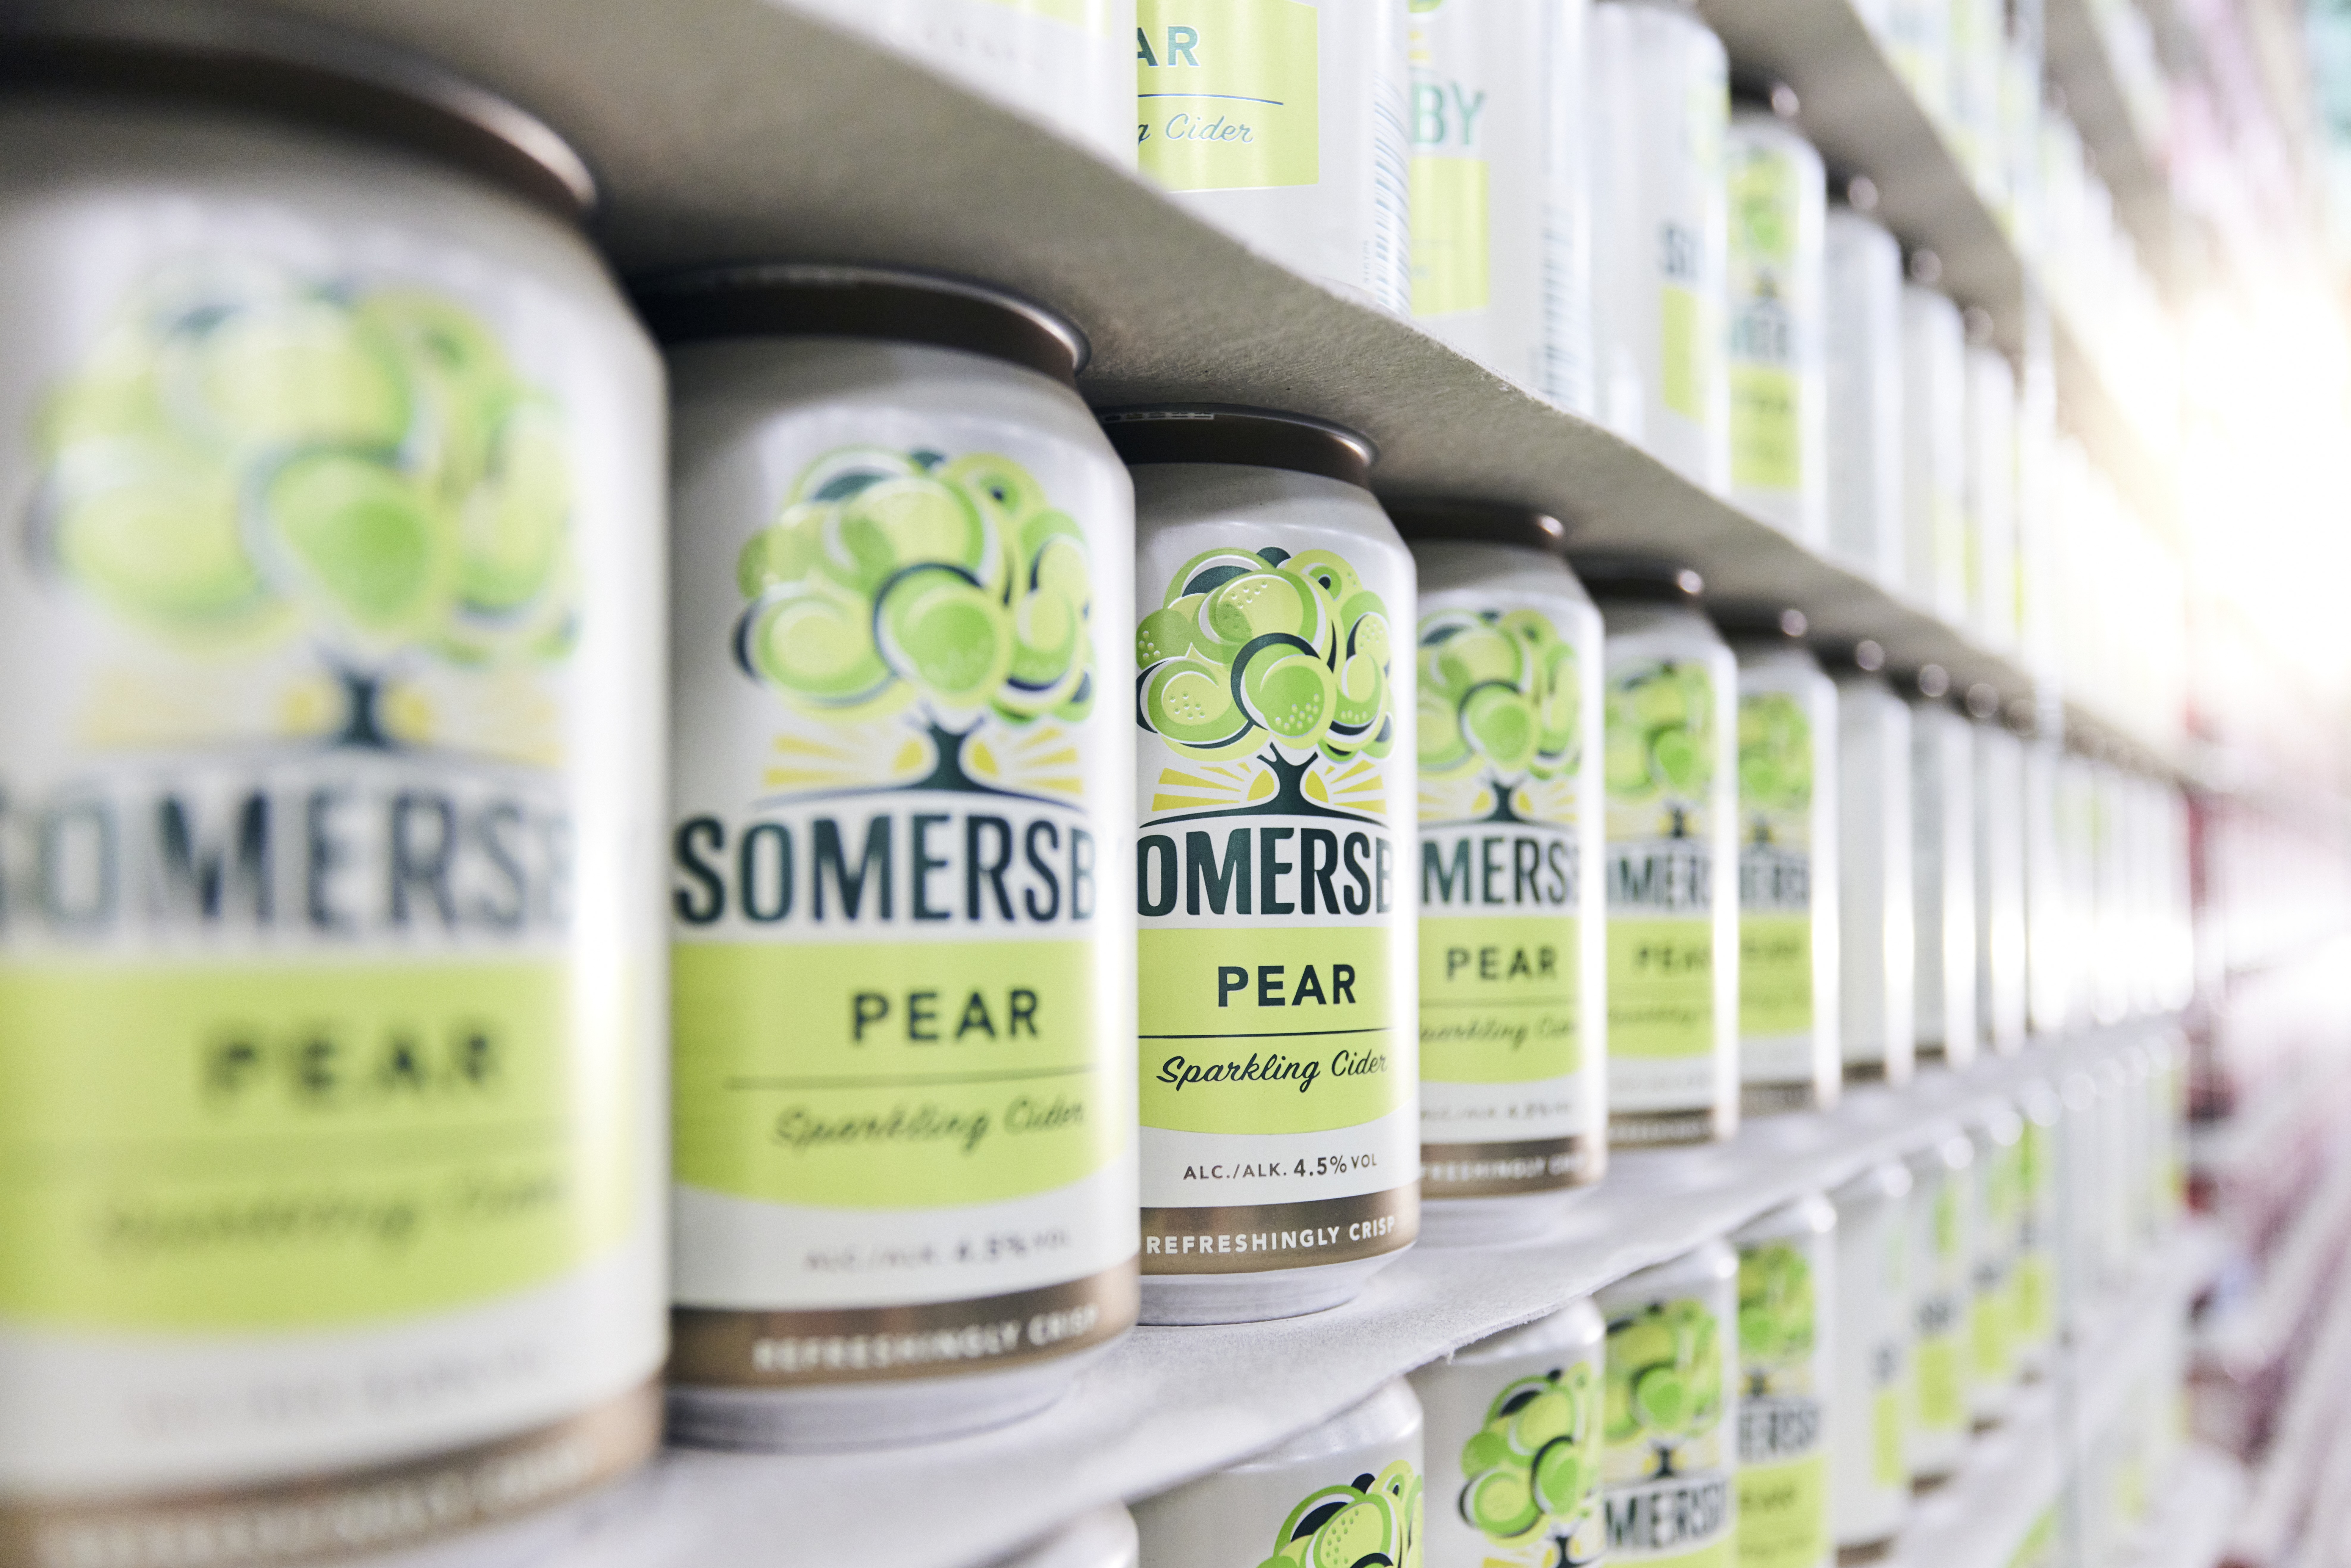 Cans of Somesby on a shelf 